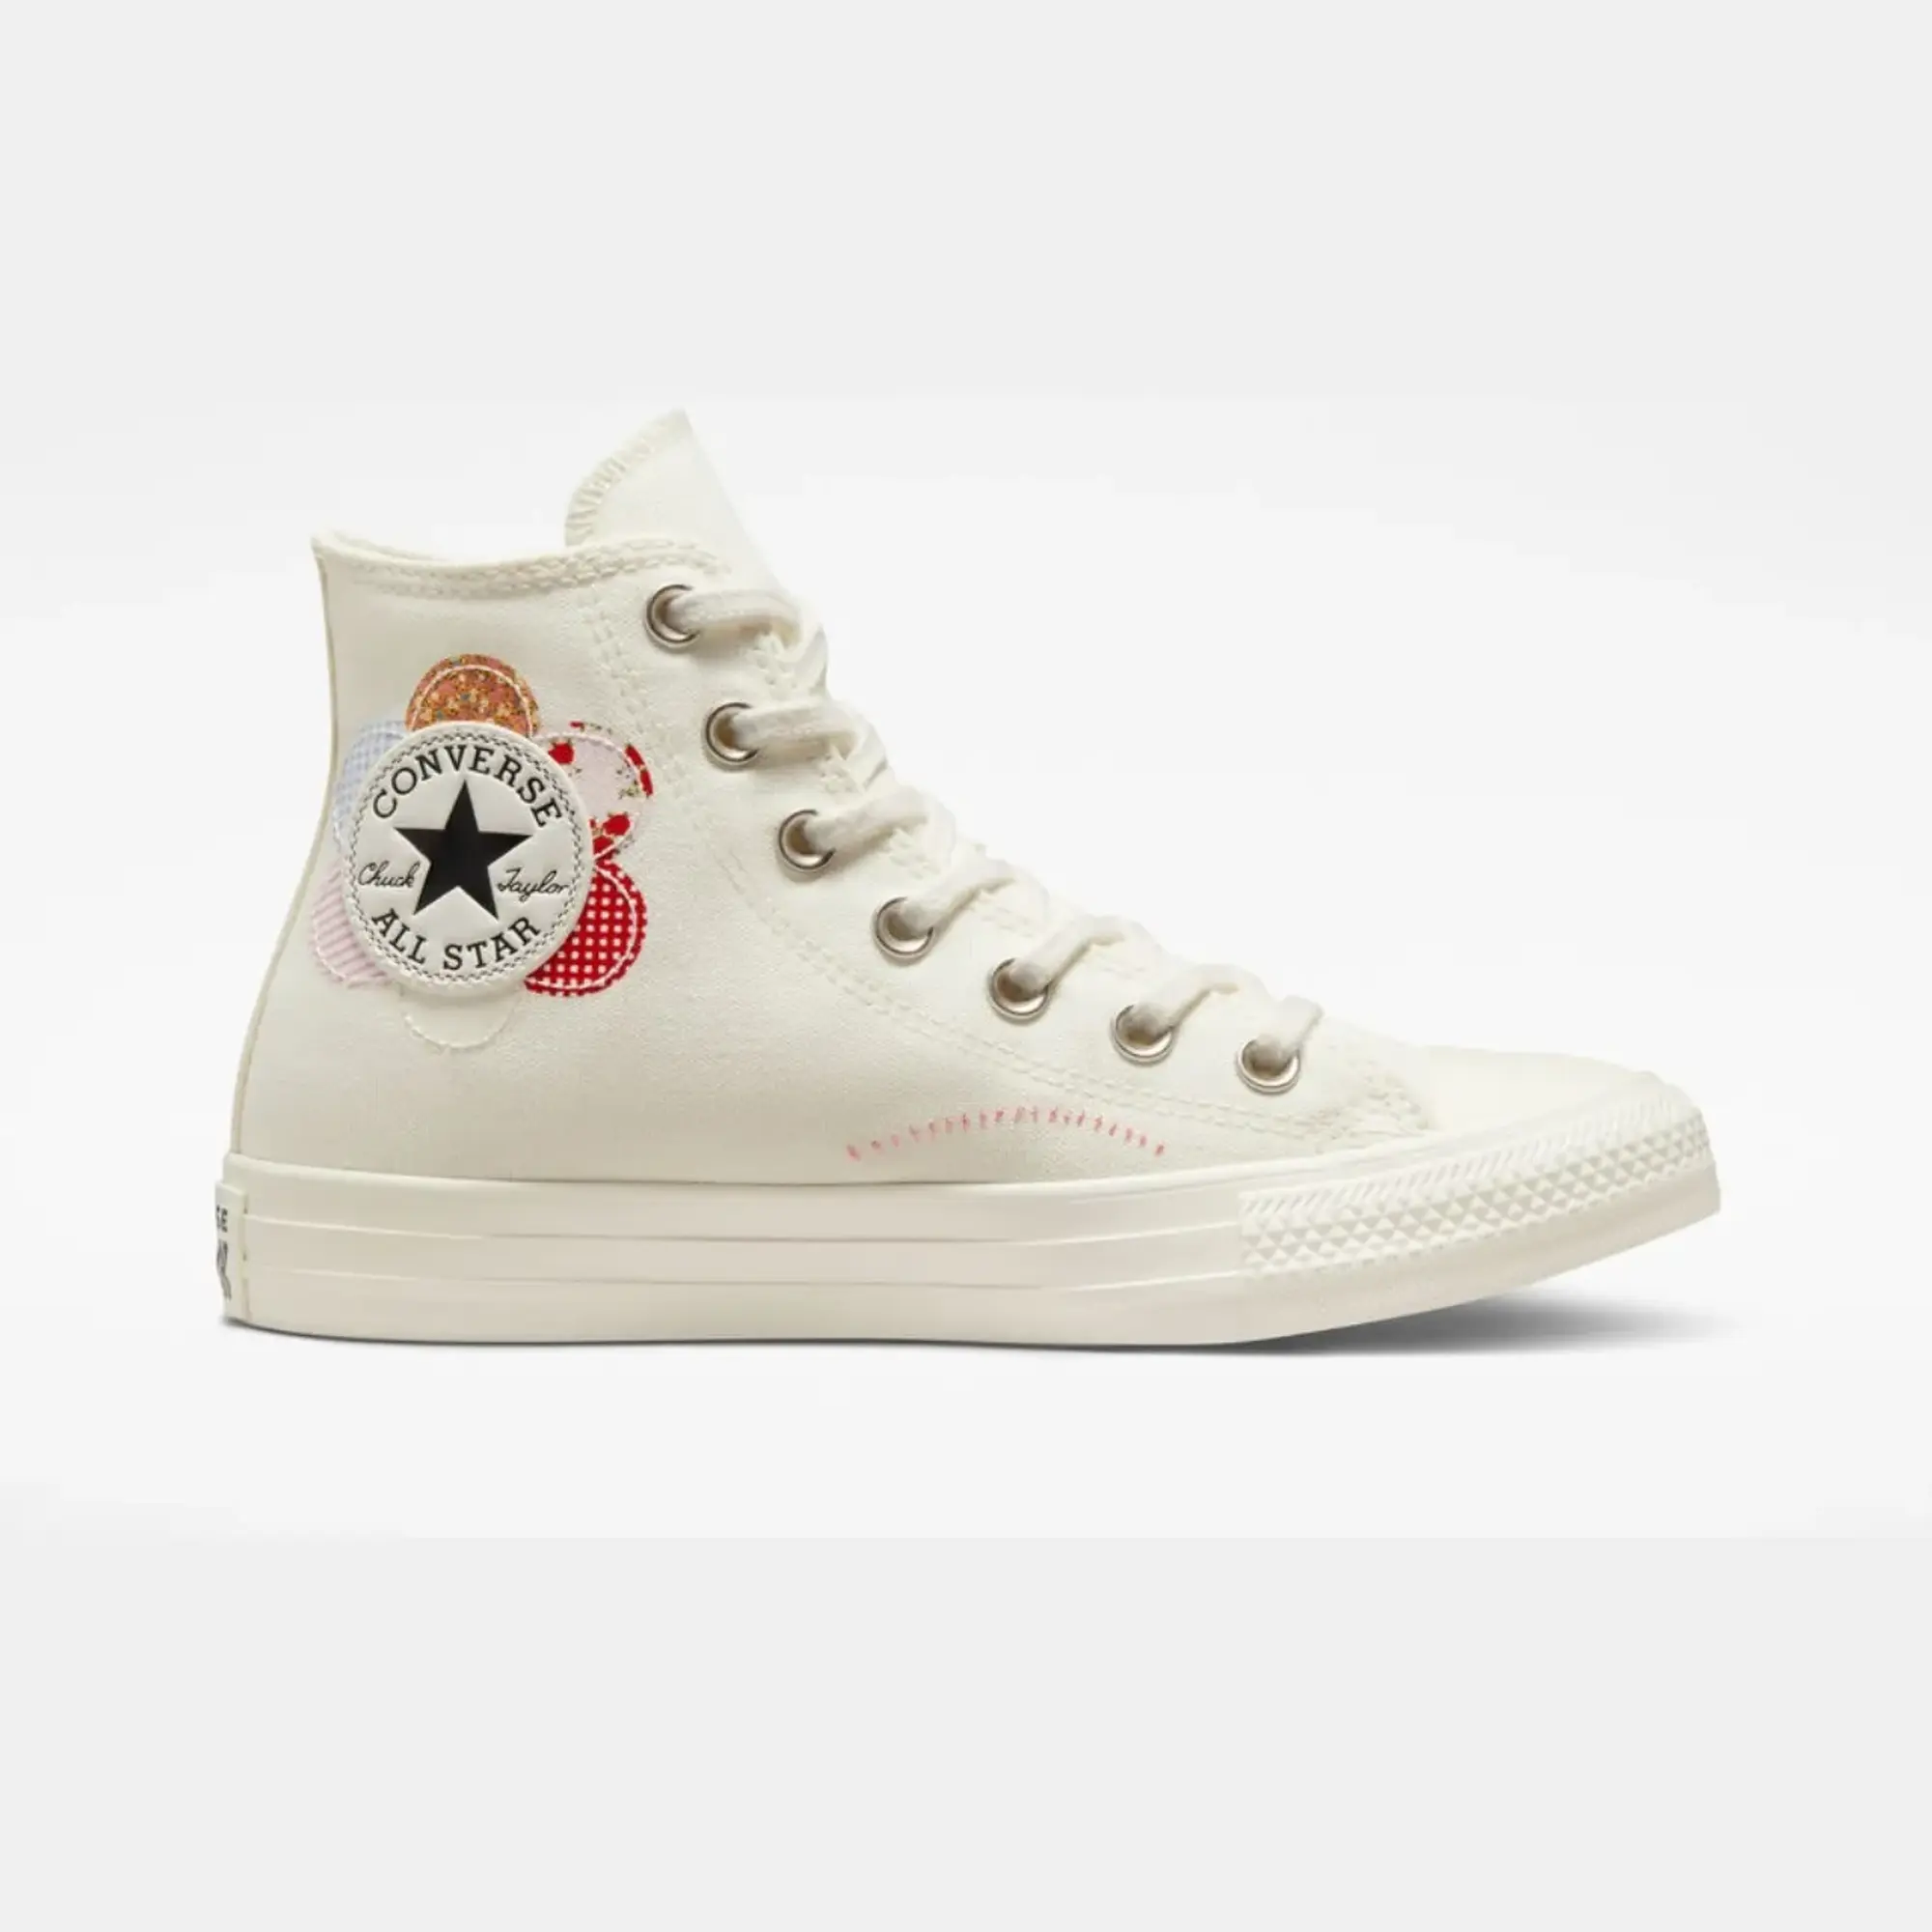 Converse all star crafted patchwork trainers in white